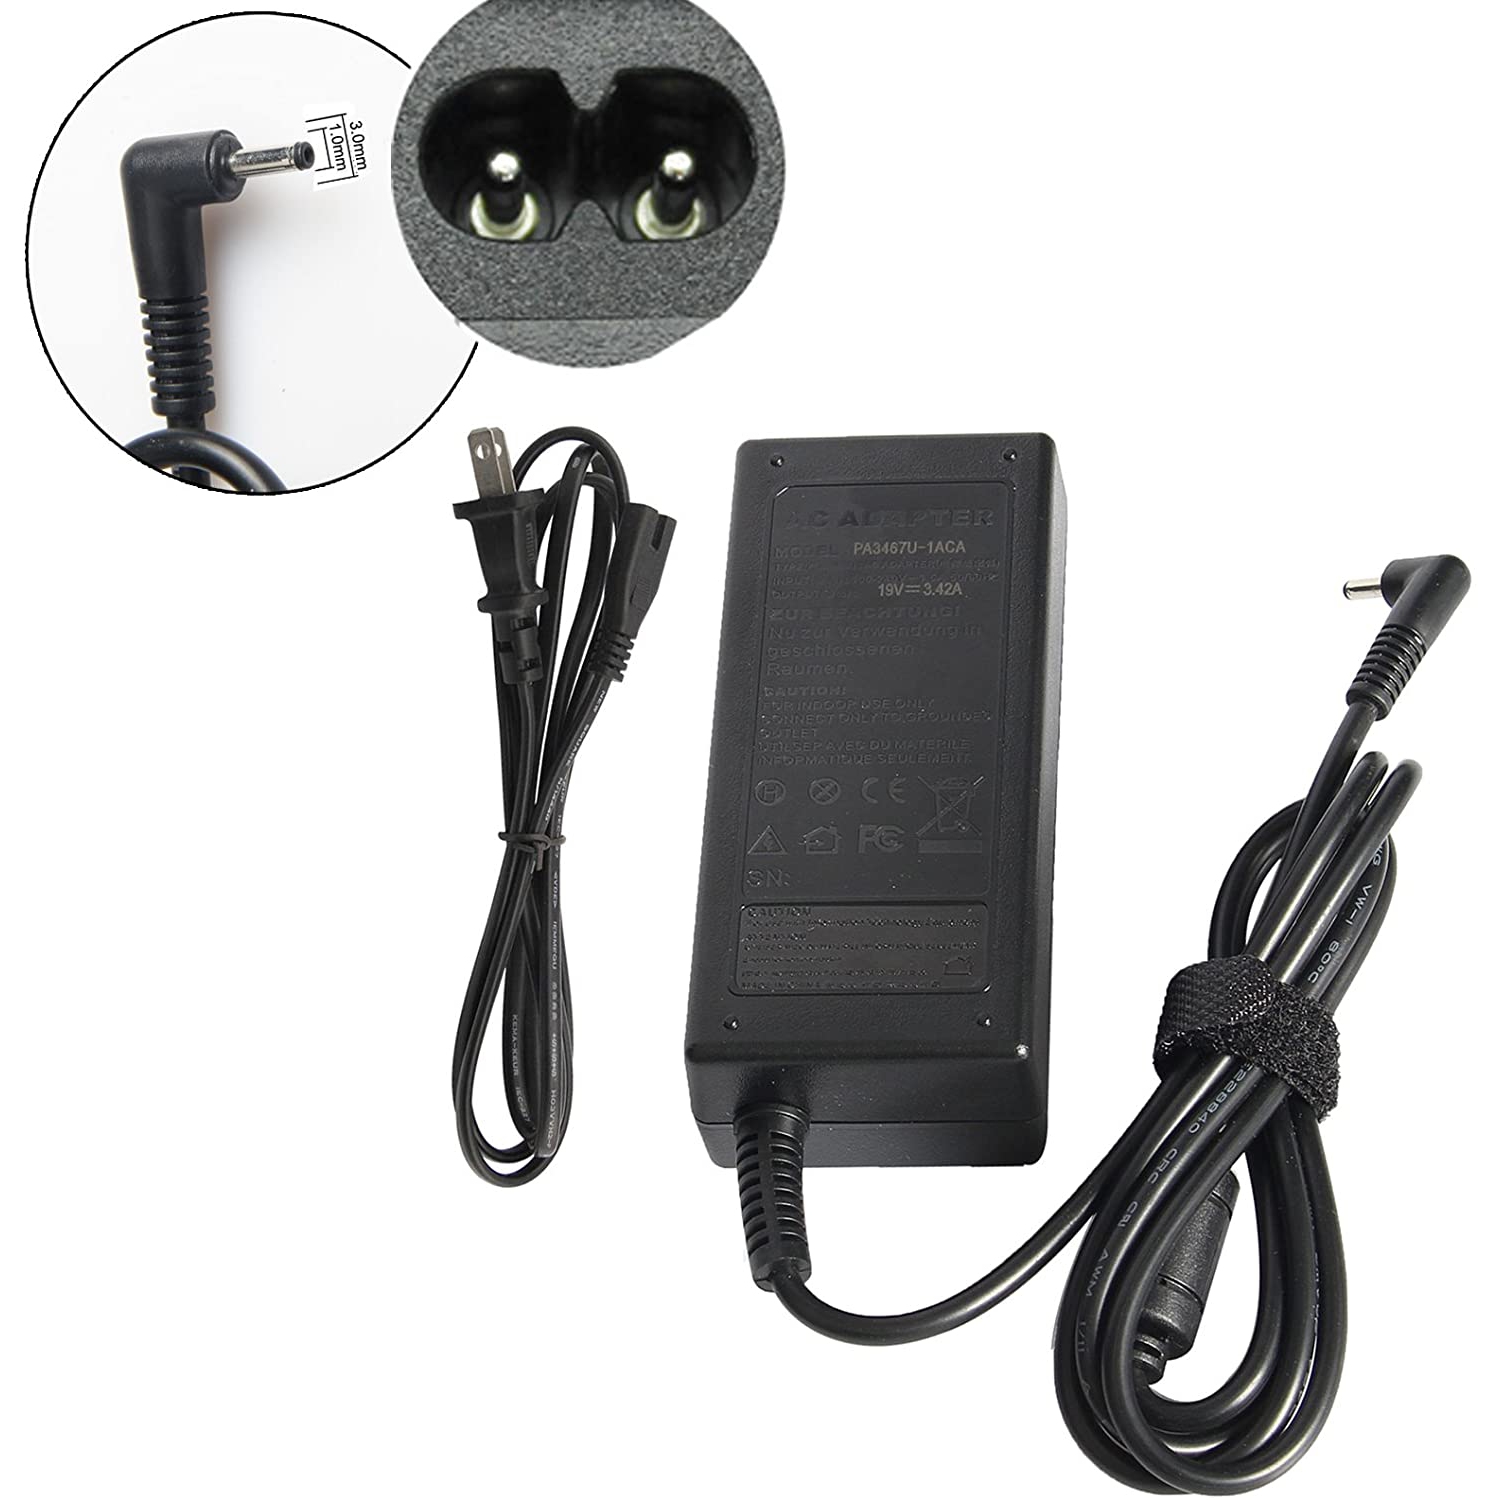 65W 19V 3.42A AC Power Adapter Charger for Acer Chromebook 11 13 14 15 R11 CB3-131-C3SZ C720-2103 CB5-571-C1DZ CB3-111-C670 CB5-132T-C1LK C730E-C4BA; Aspire One Cloudbook 11 14 AO1-131-C7DW C9PM